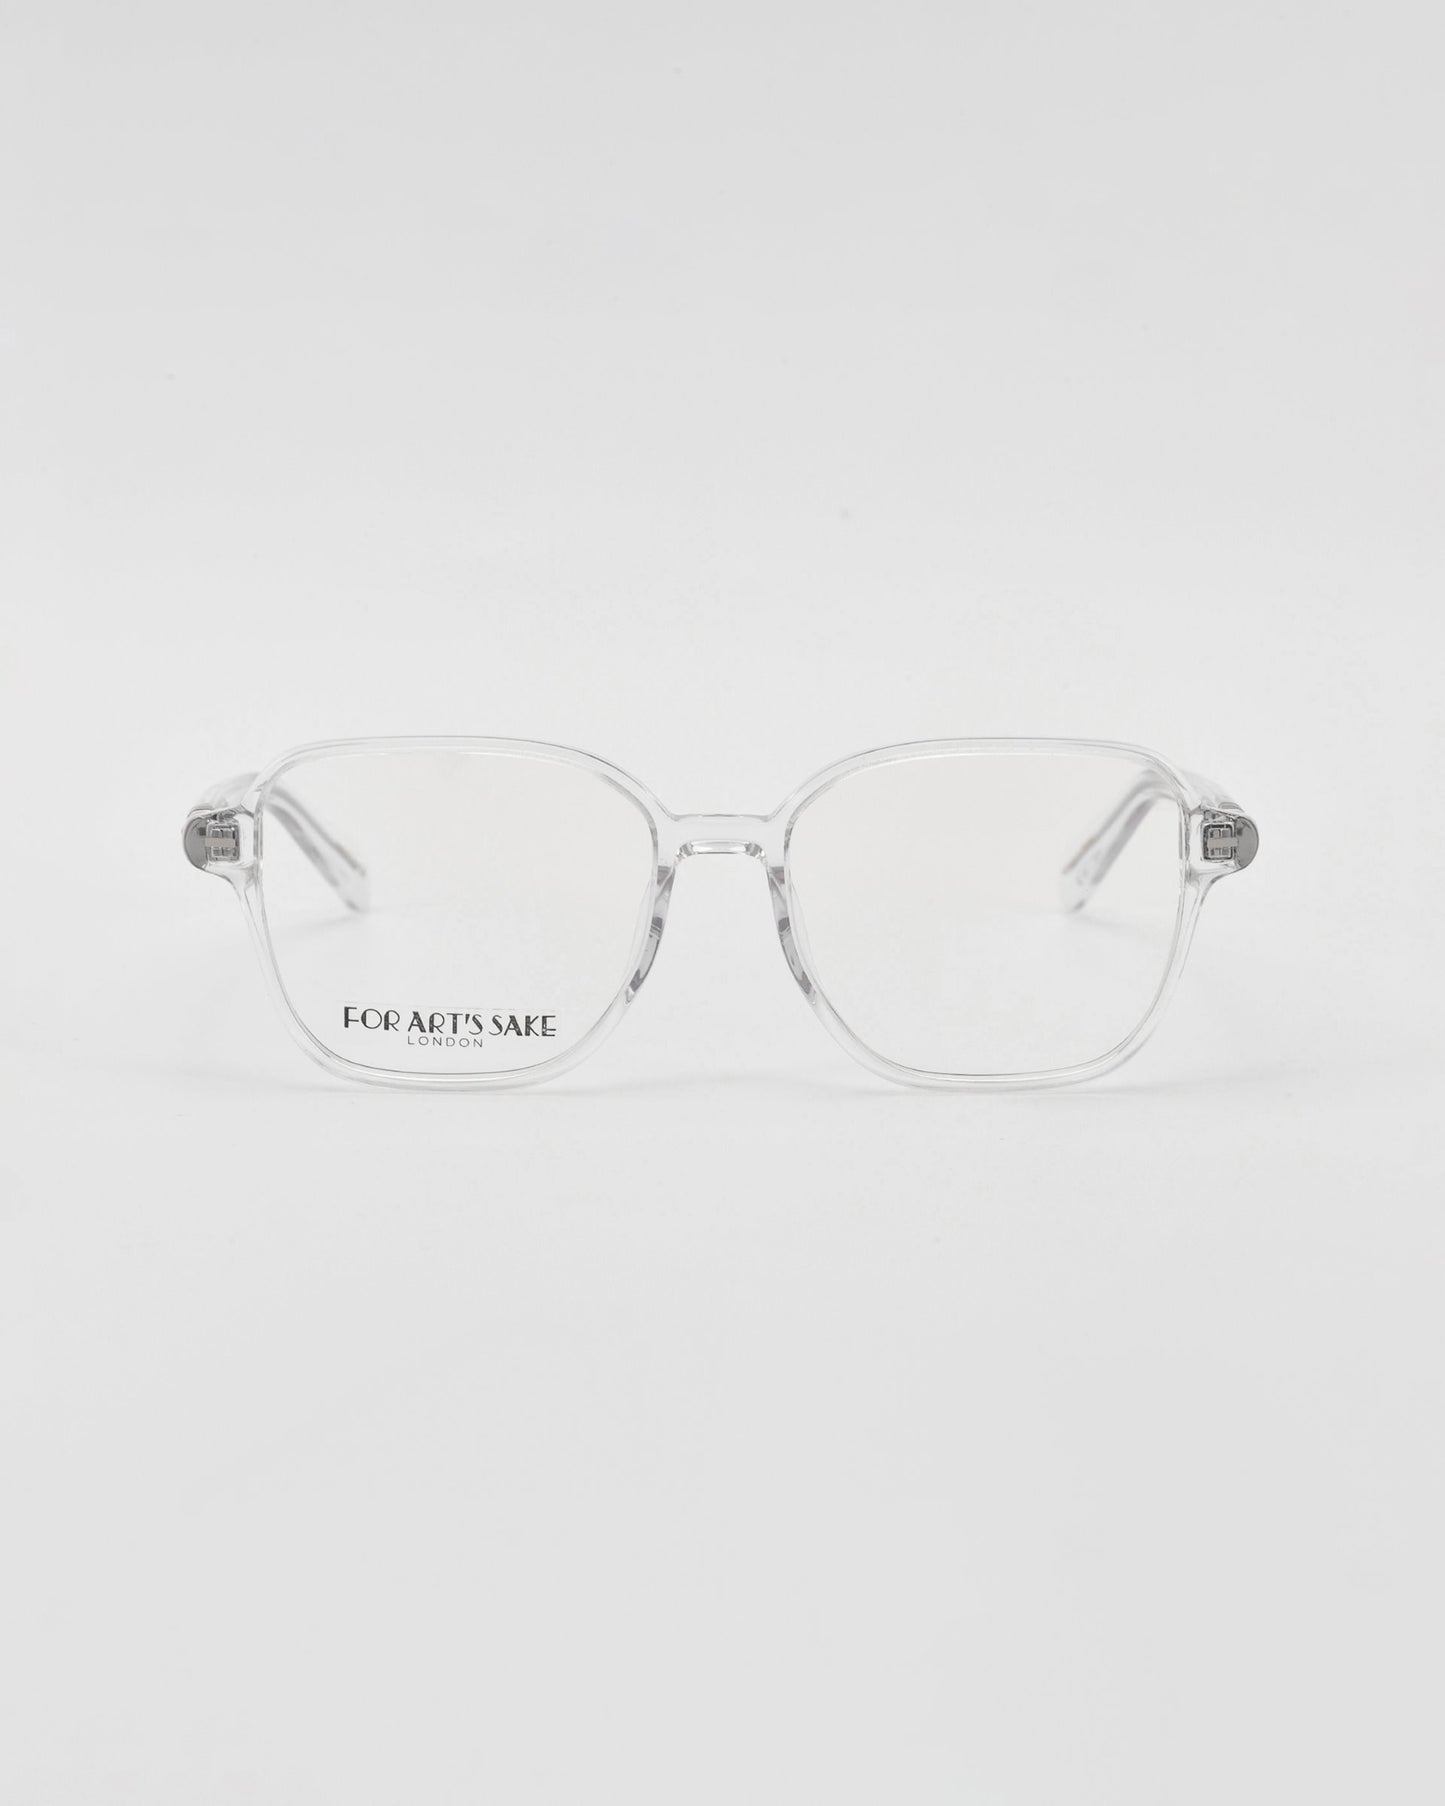 A pair of For Art's Sake® Charm transparent framed optical glasses in a cat-eye shape on a white background, with a visible brand name etched on one lens.